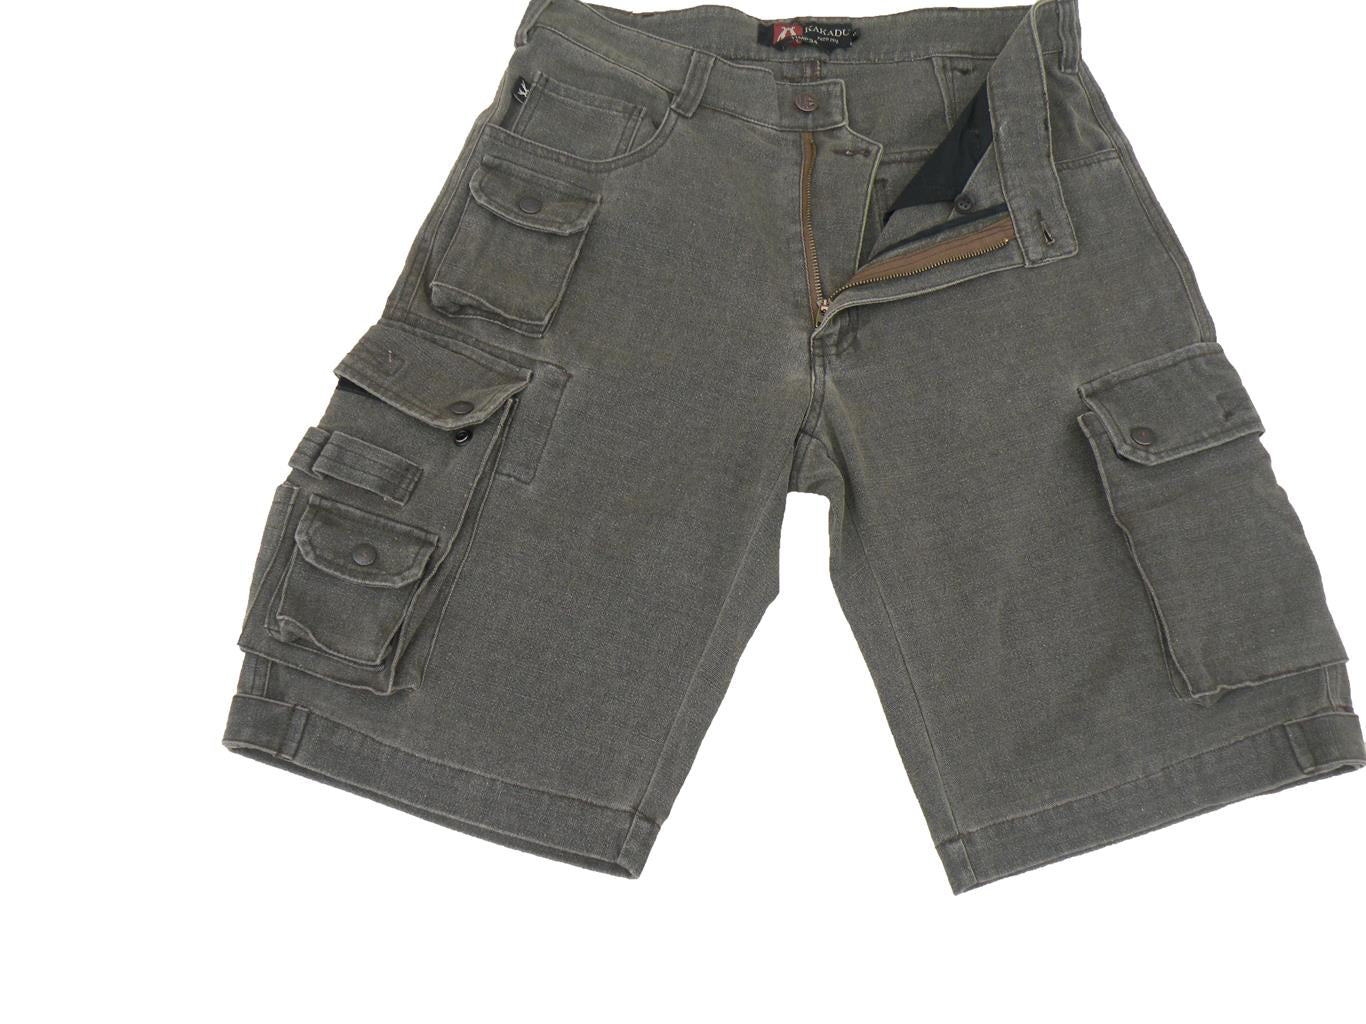 Leisure Cargo Shorts Utility- Comfortable Leg- A lot of bags in beige